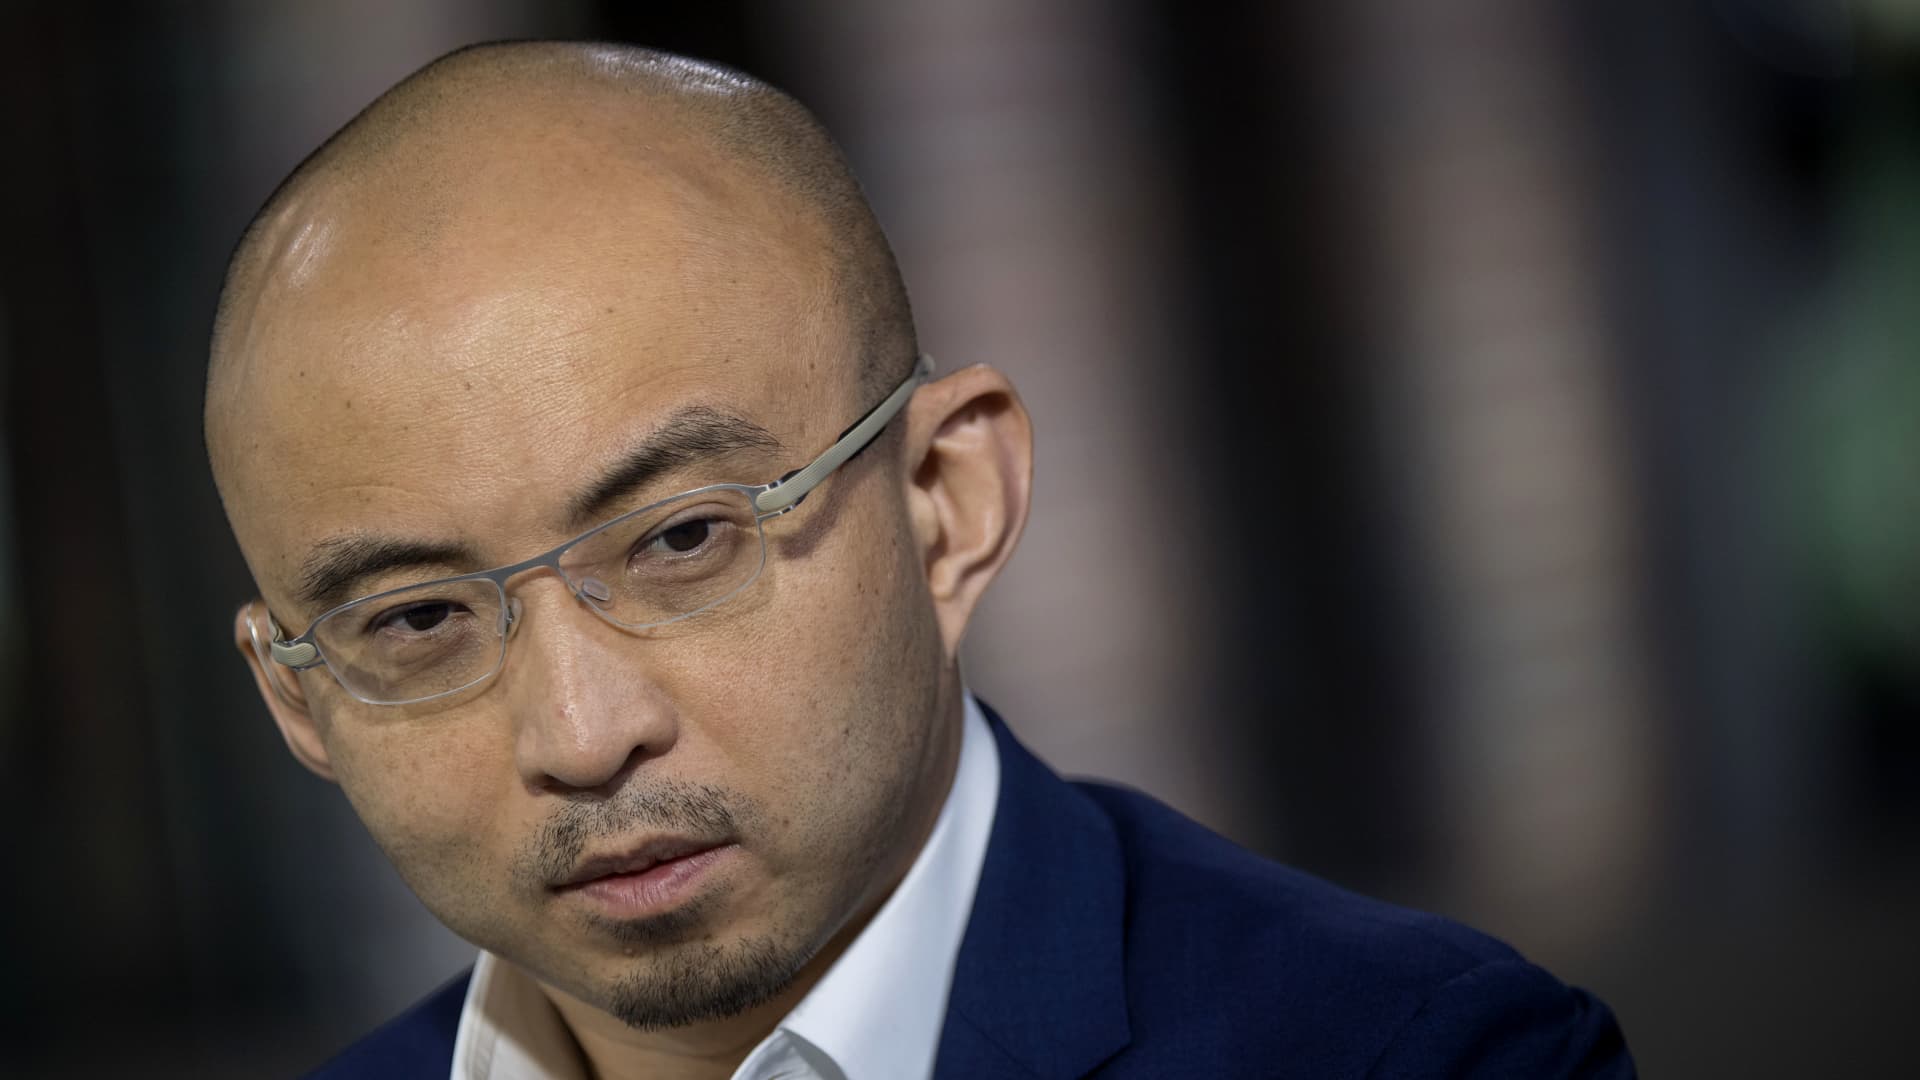 China Renaissance says its missing founder Bao Fan is cooperating with a government probe